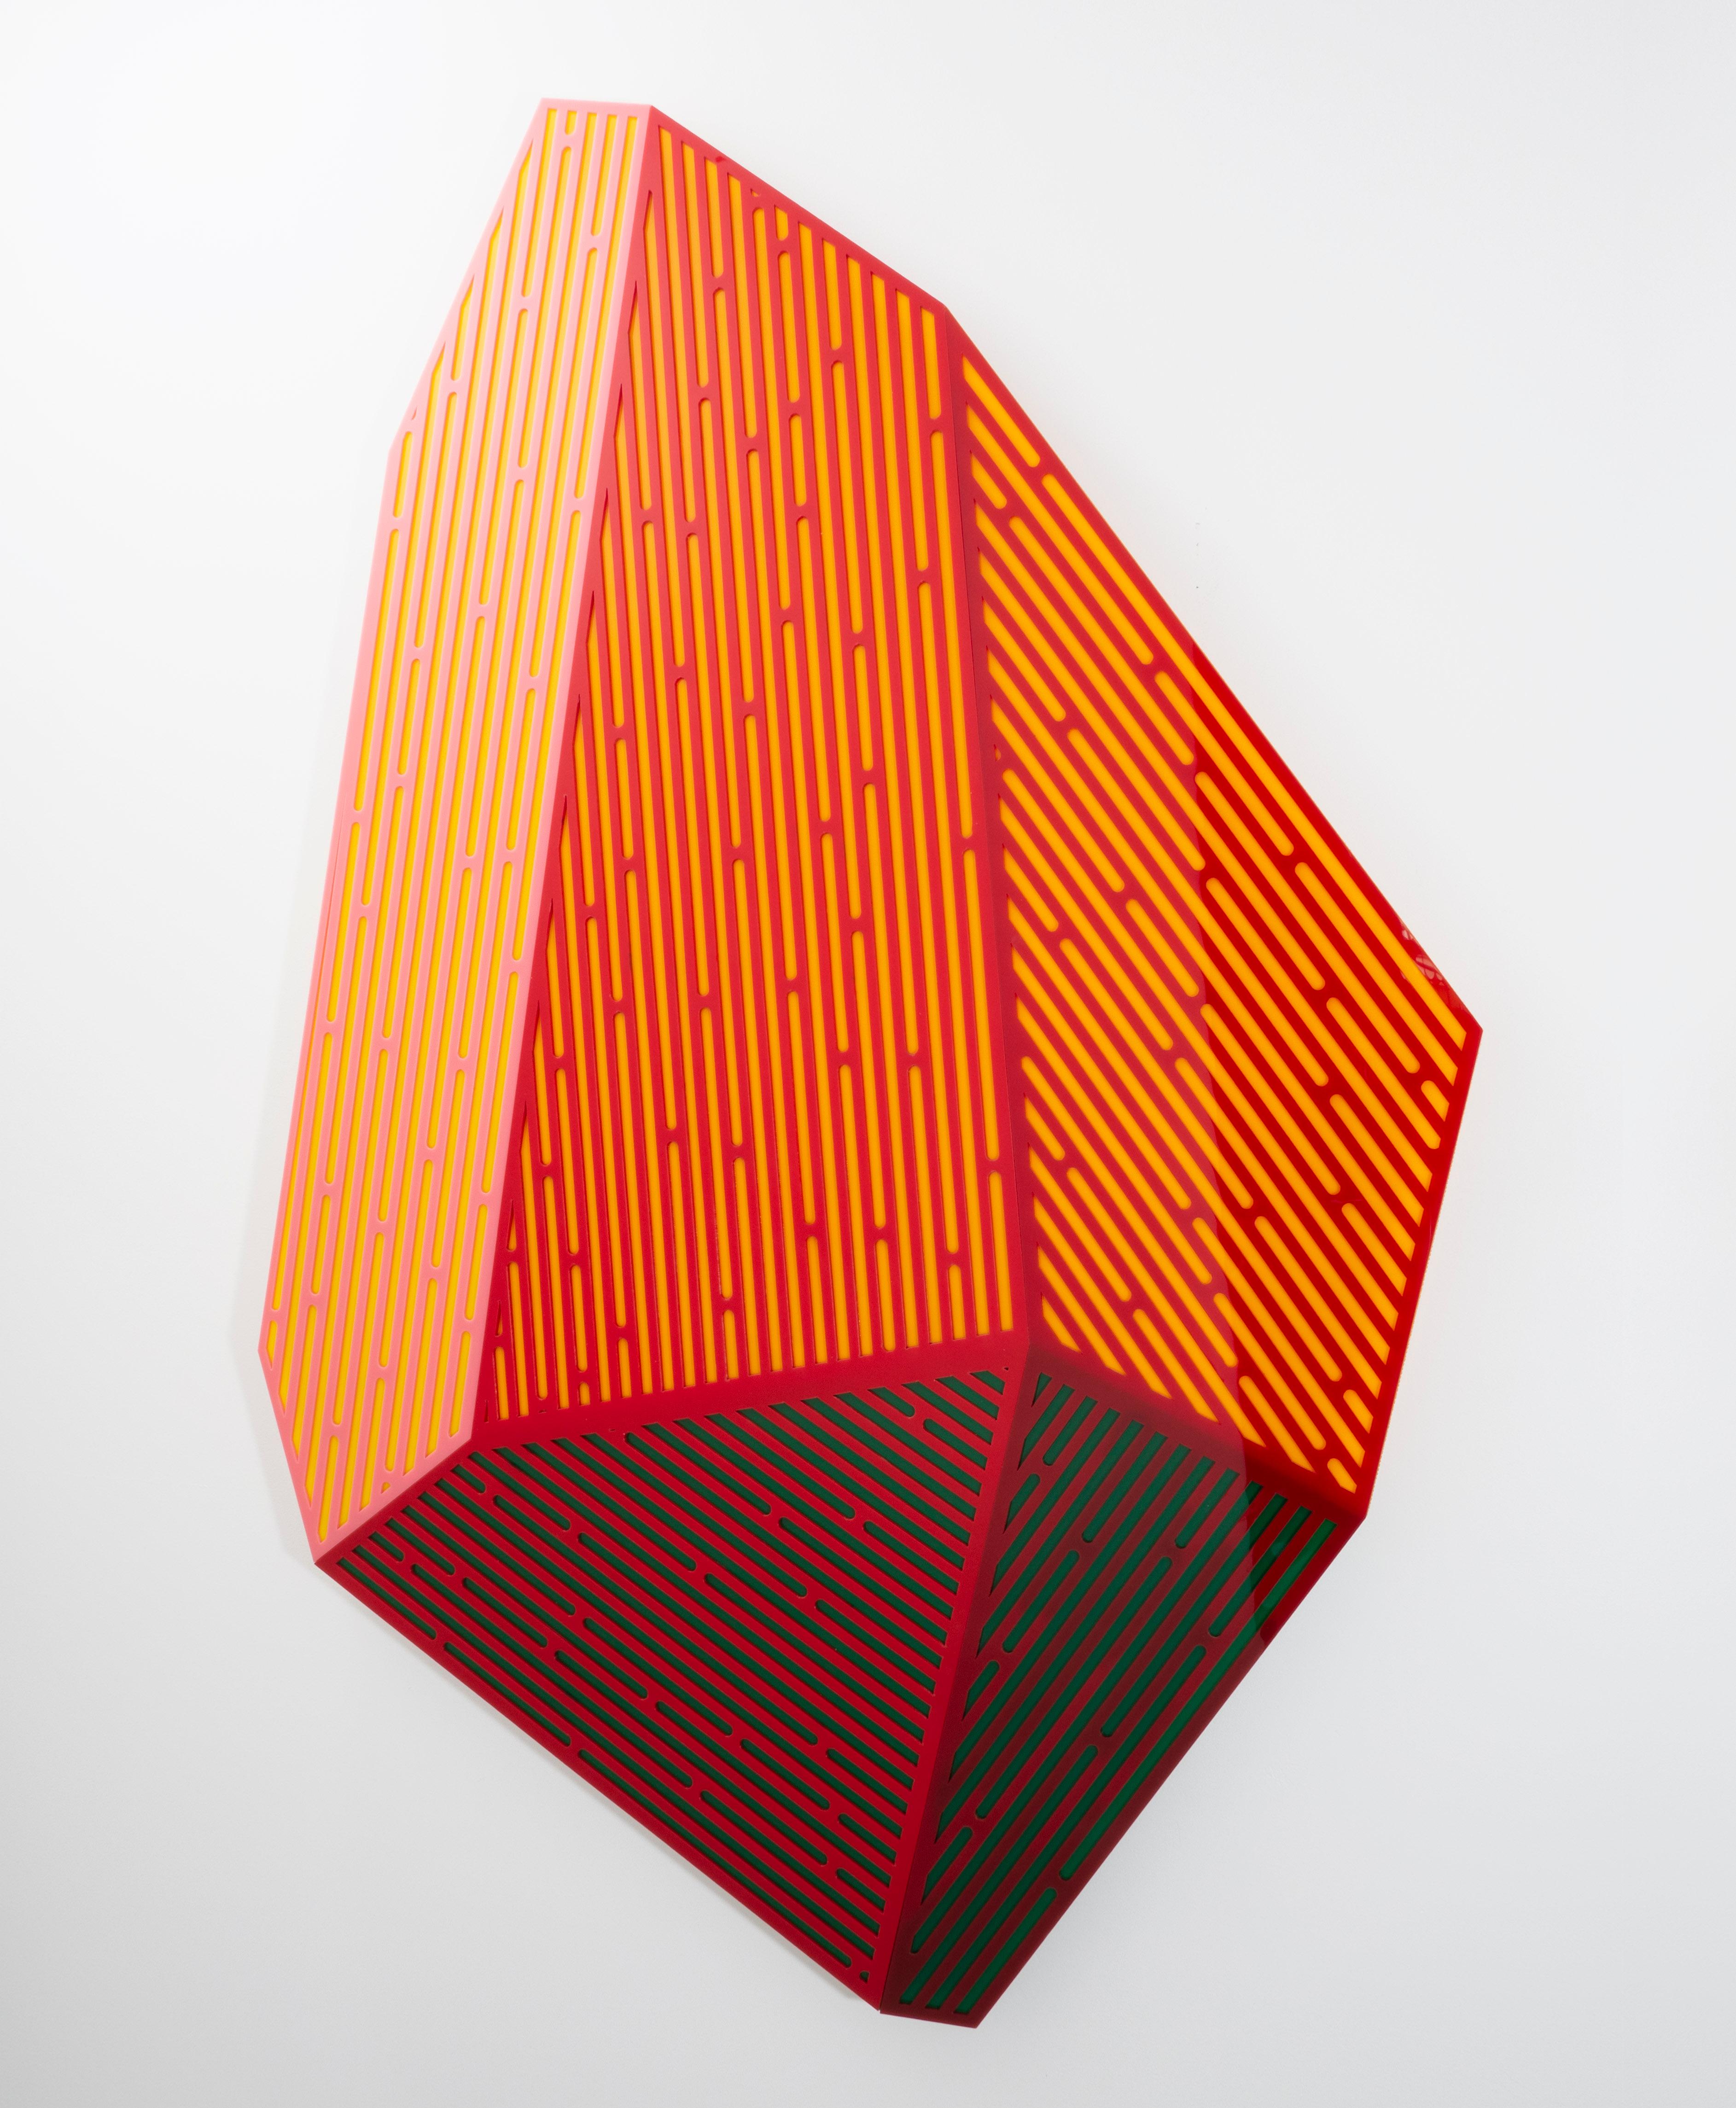 Prismatic Polygon IV: geometric abstract wall-mounted sculpture in red & orange - Sculpture by Jay Walker